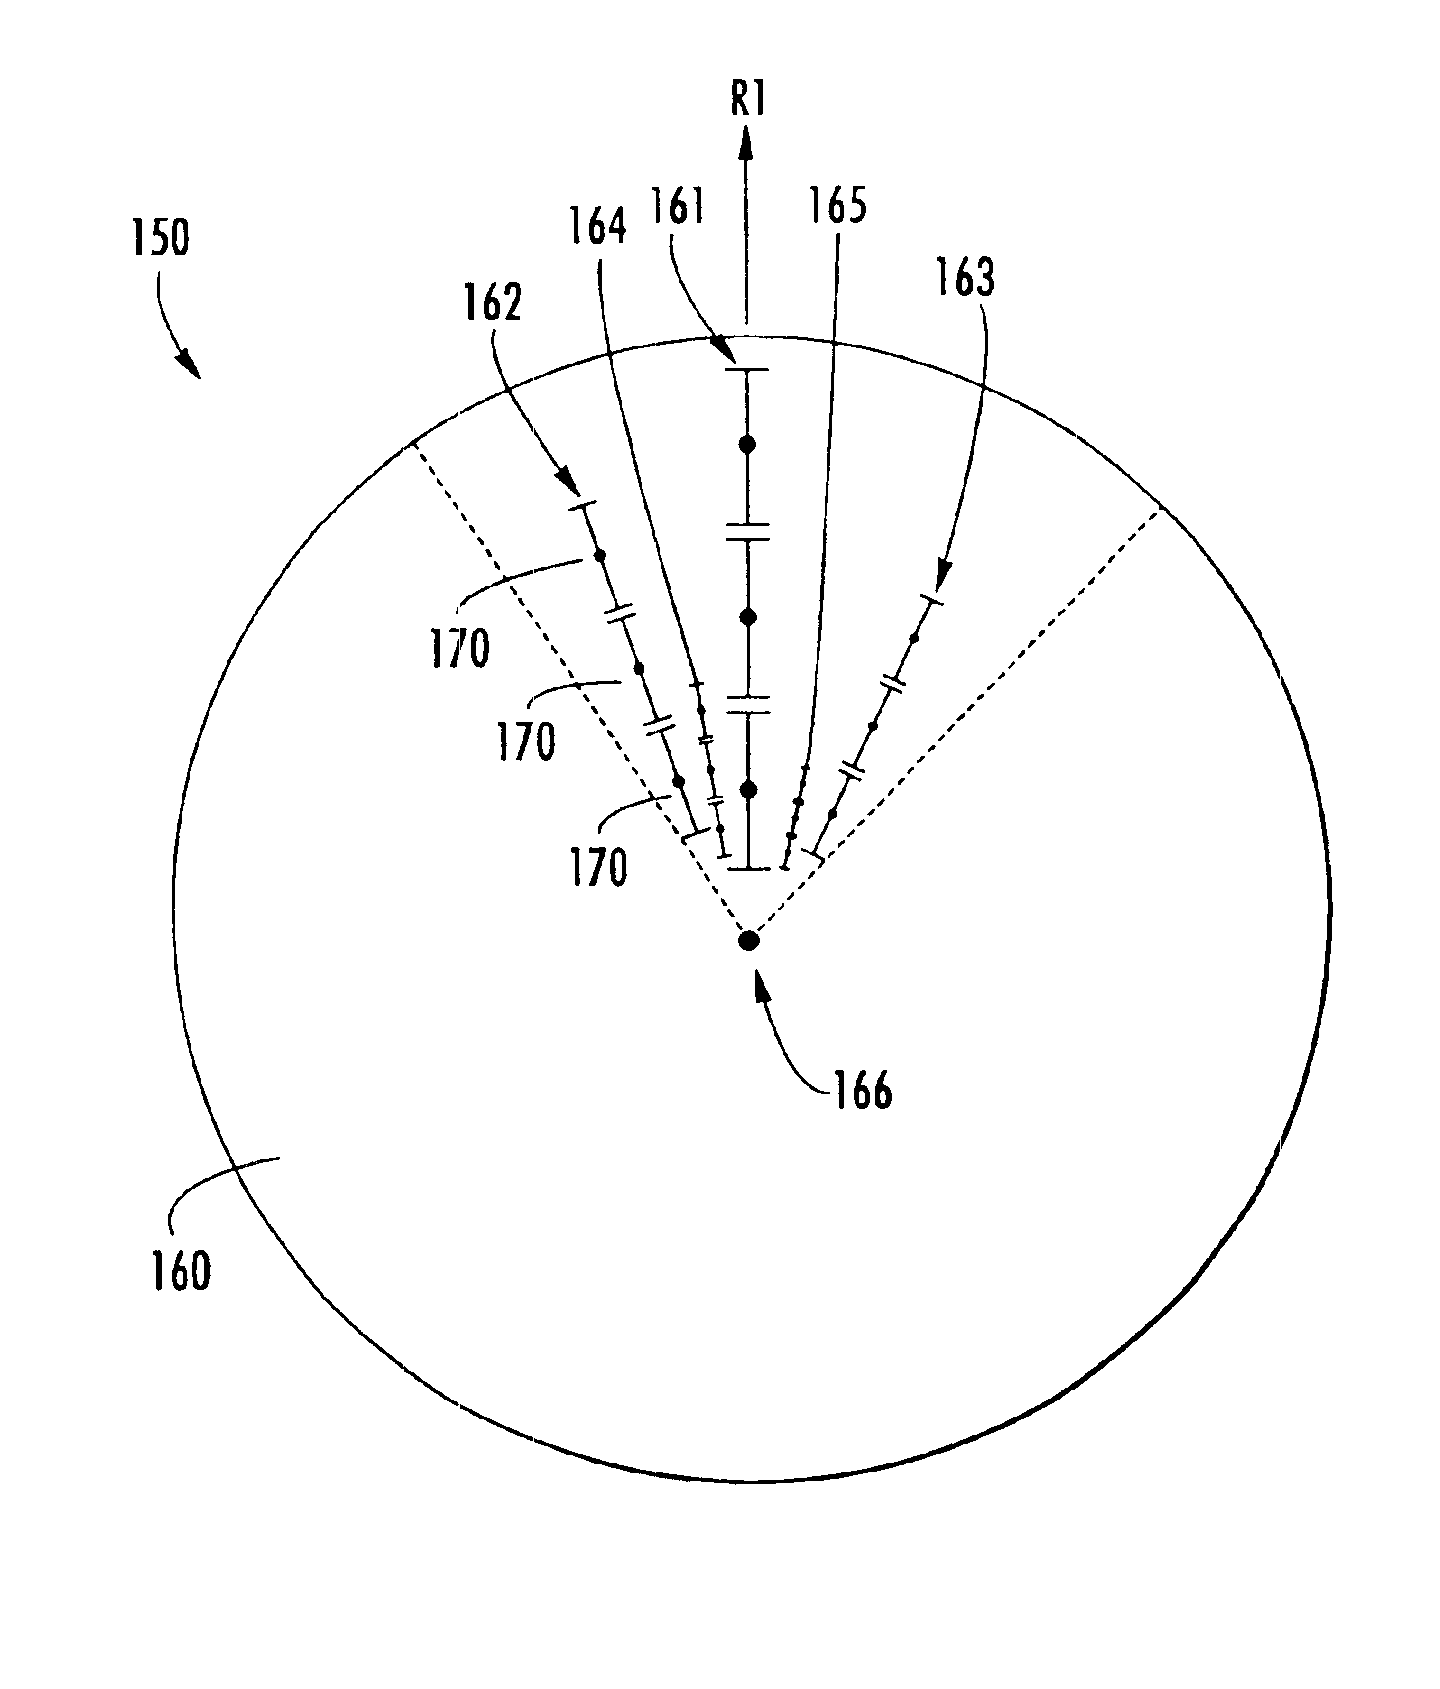 Multiband radially distributed phased array antenna with a sloping ground plane and associated methods